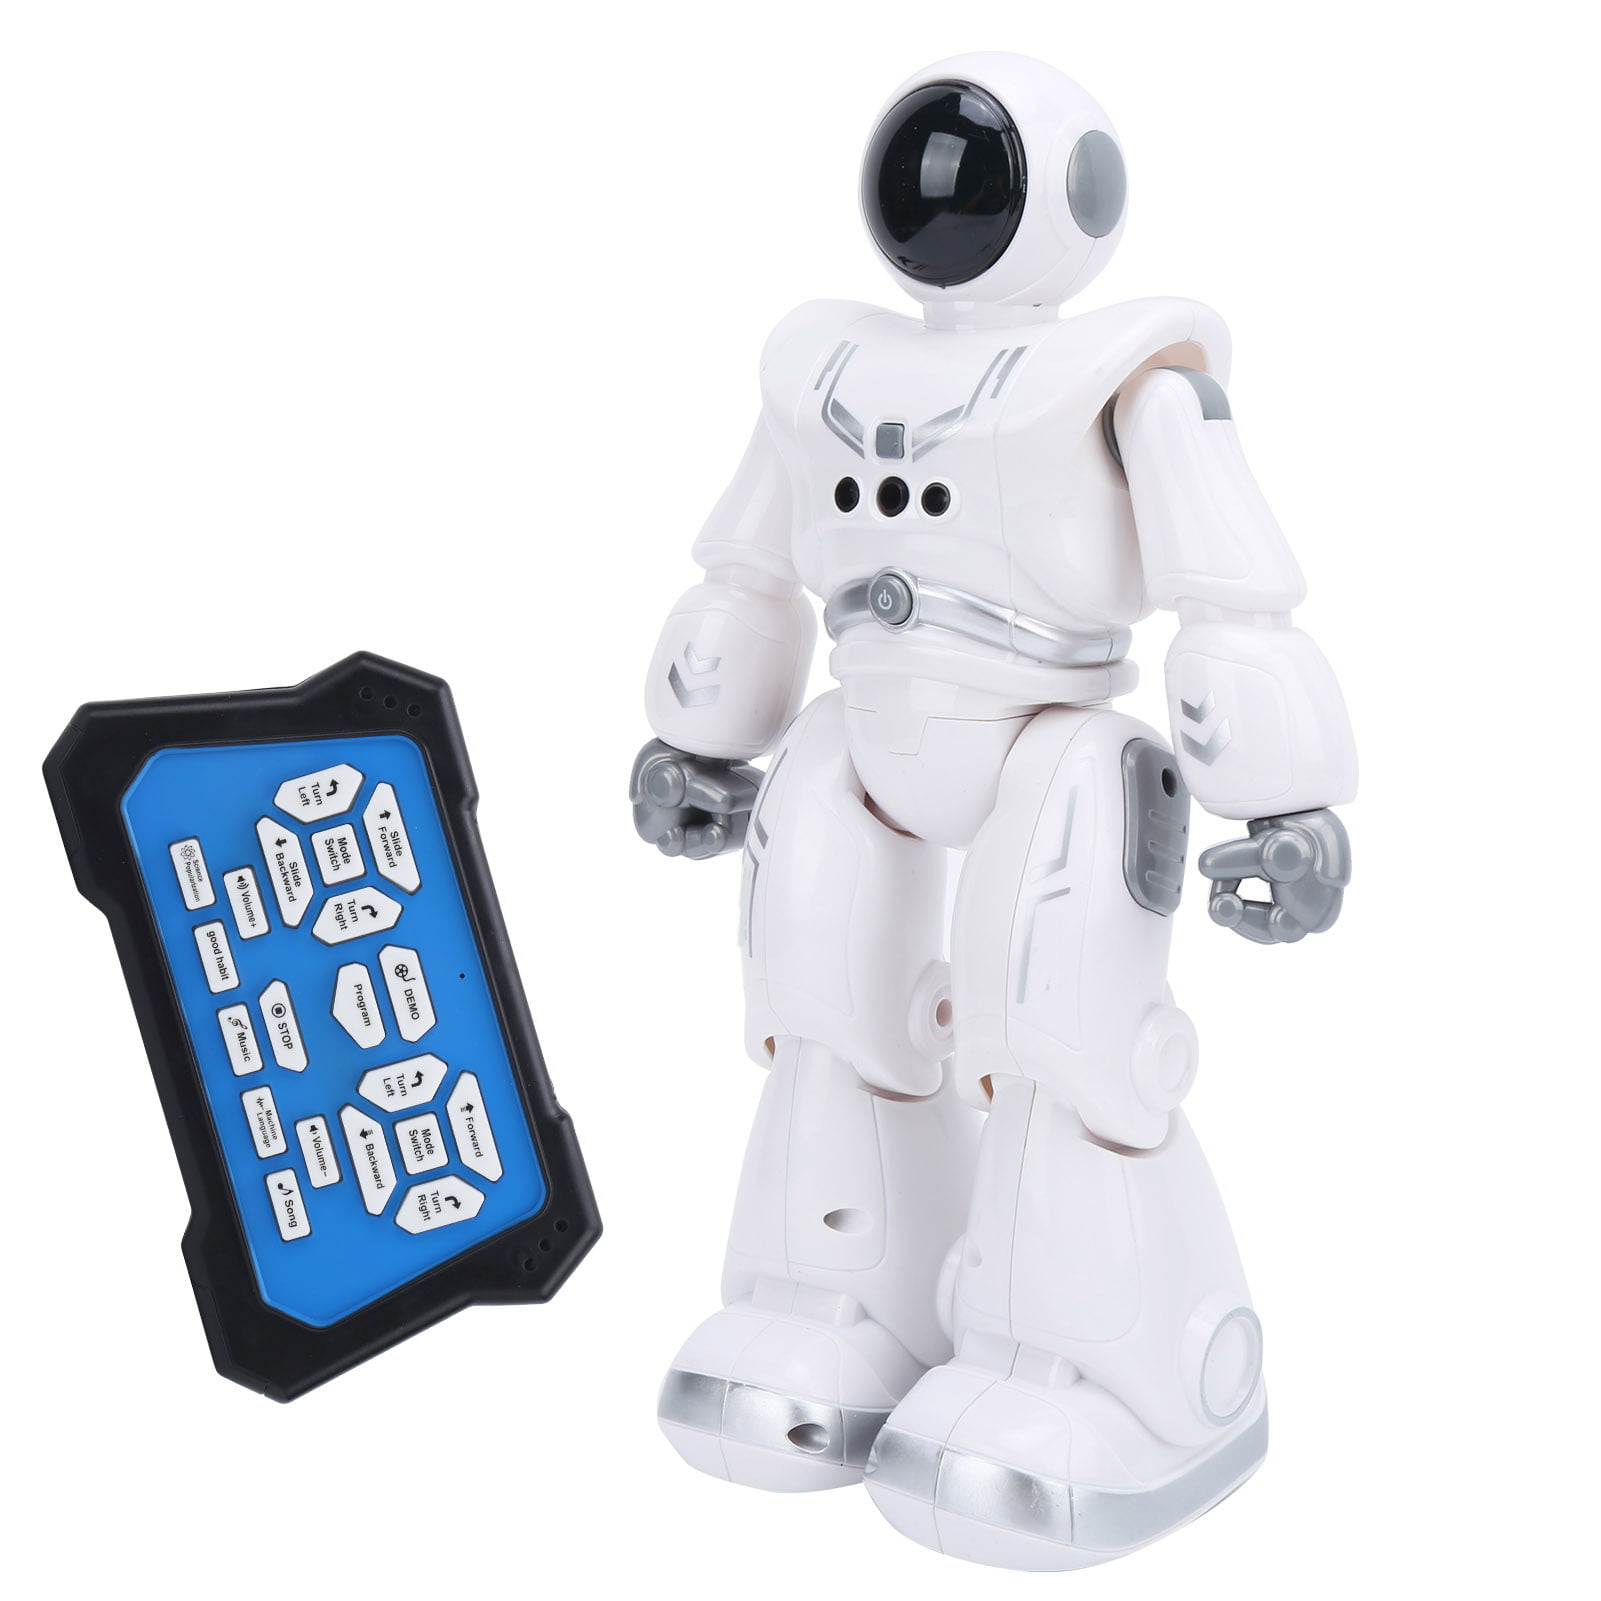 Programmable RC Remote Control Intelligent Programmable Robot Toy For Education -